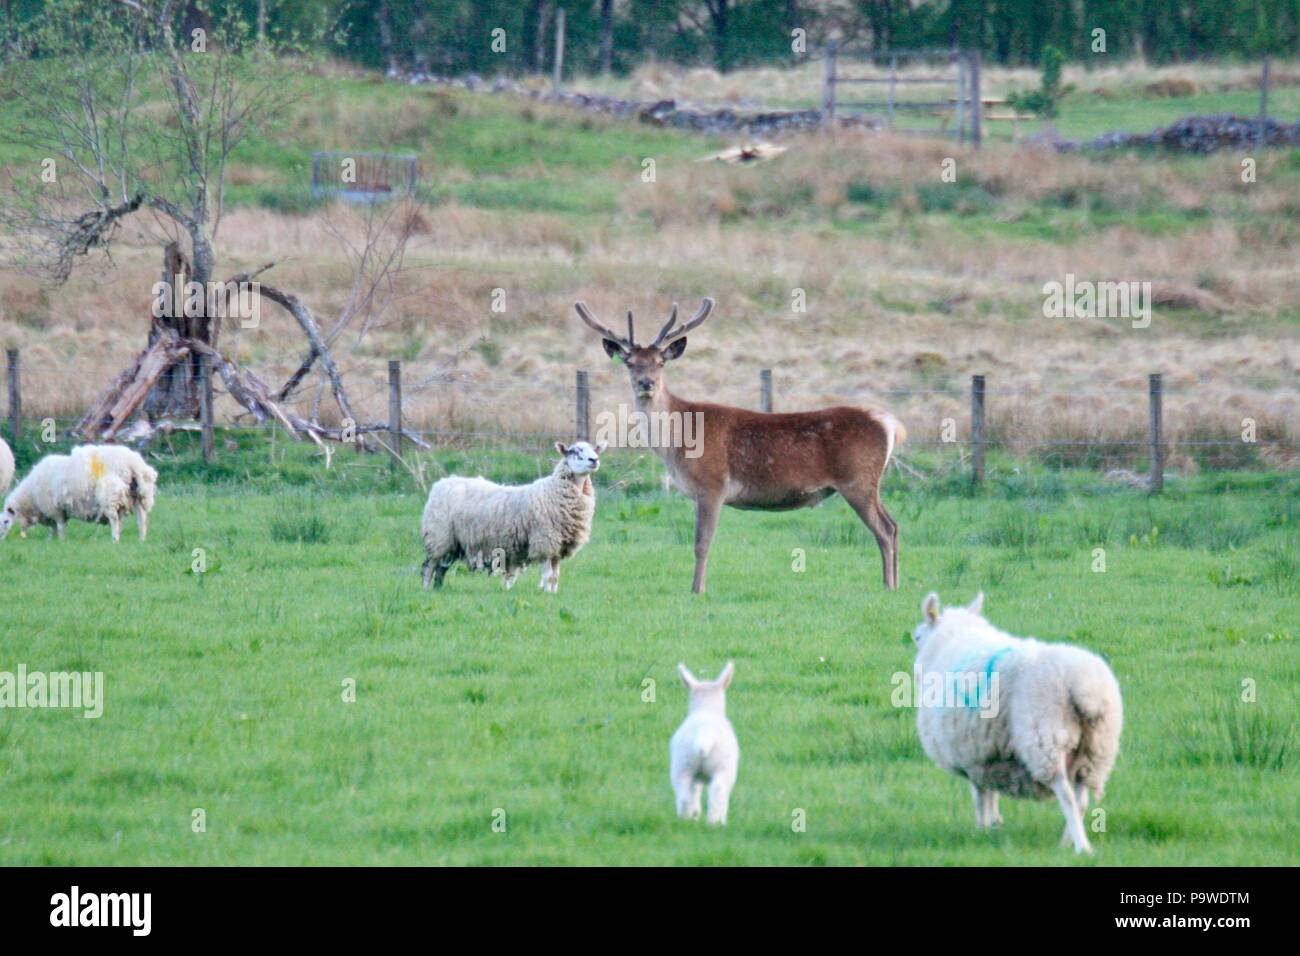 sheep and deer in a field in the Highlands of Scotland Stock Photo